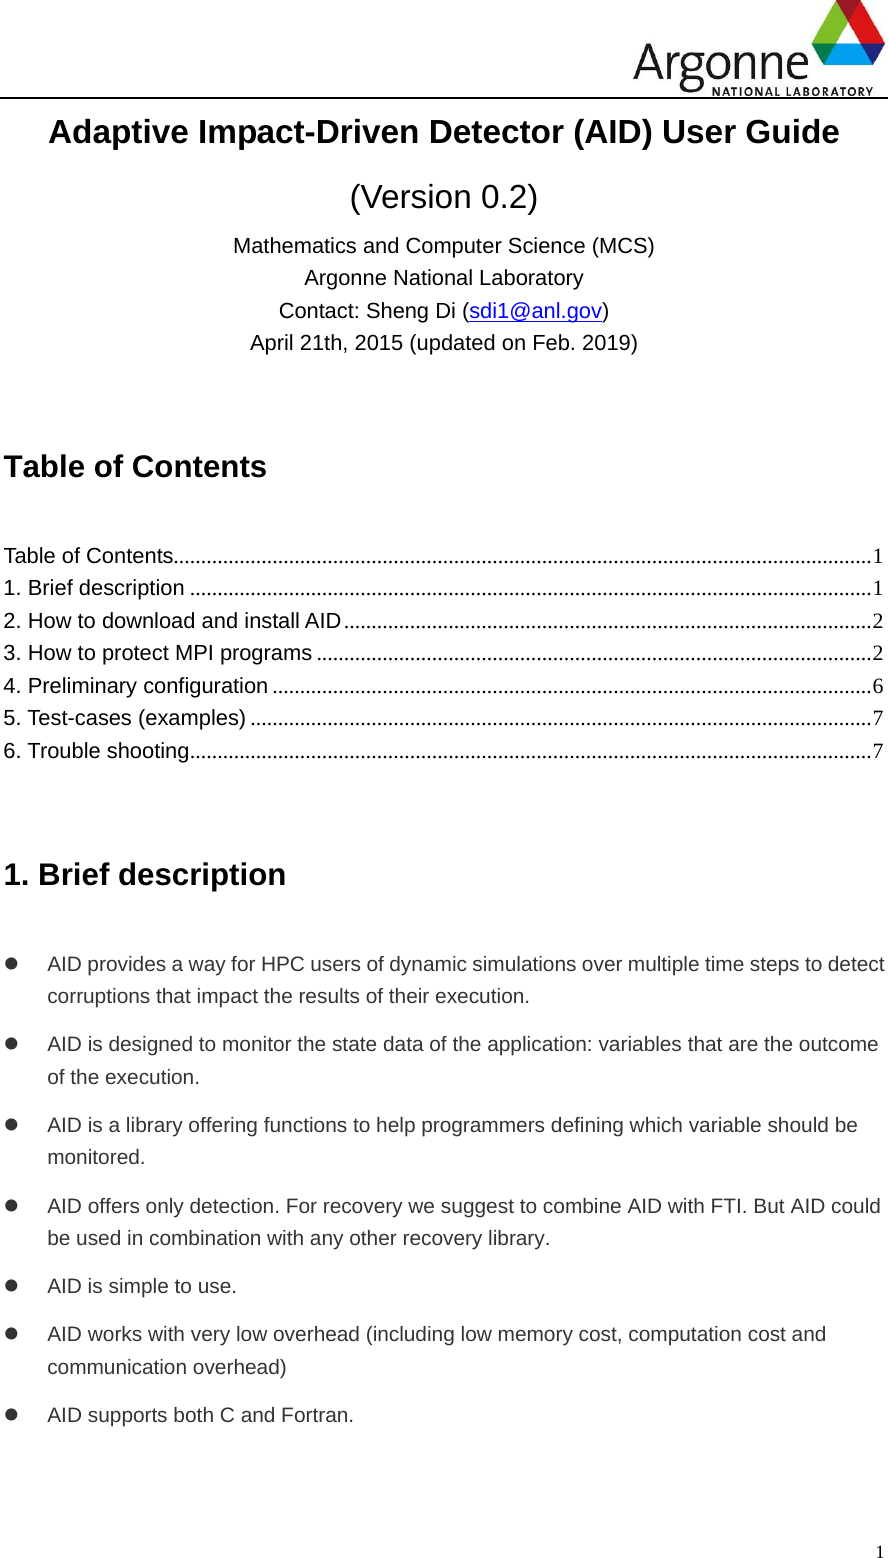 Page 1 of 9 - Aid-0.2-user-guide